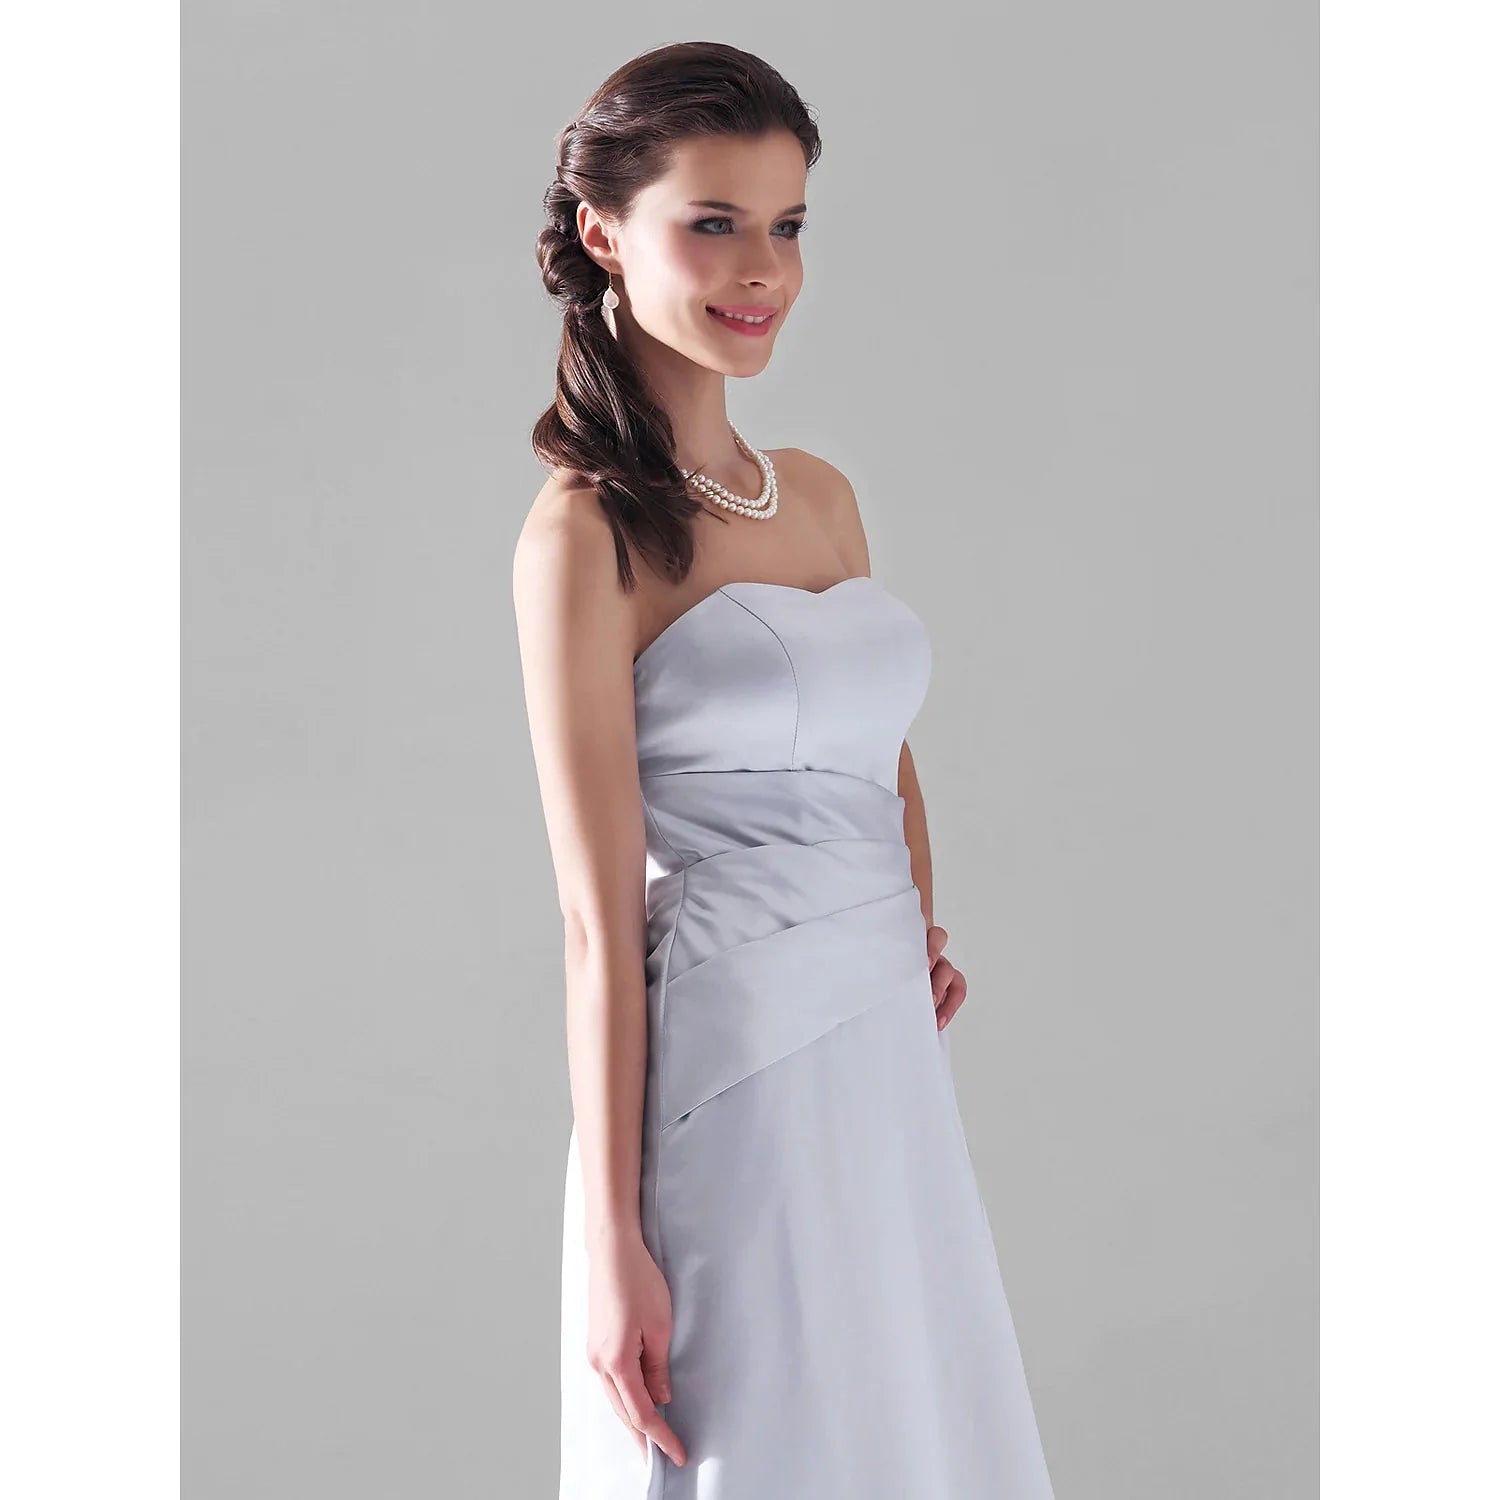 Princess / A-Line Bridesmaid Dress Strapless Sleeveless Open Back Floor Length Satin with Side Draping